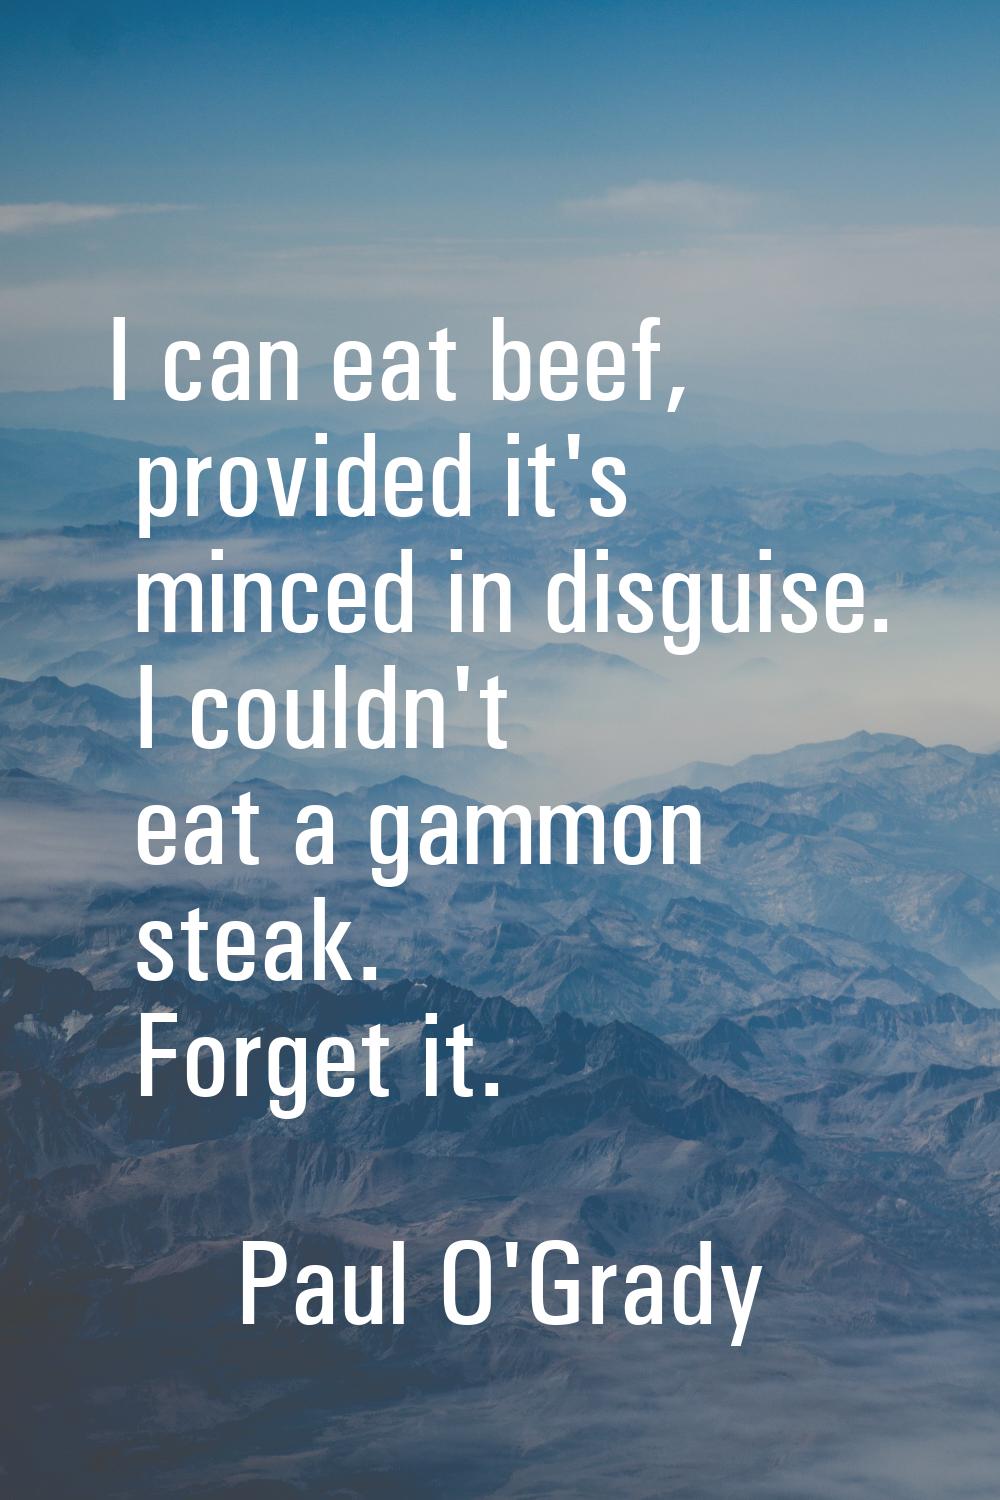 I can eat beef, provided it's minced in disguise. I couldn't eat a gammon steak. Forget it.